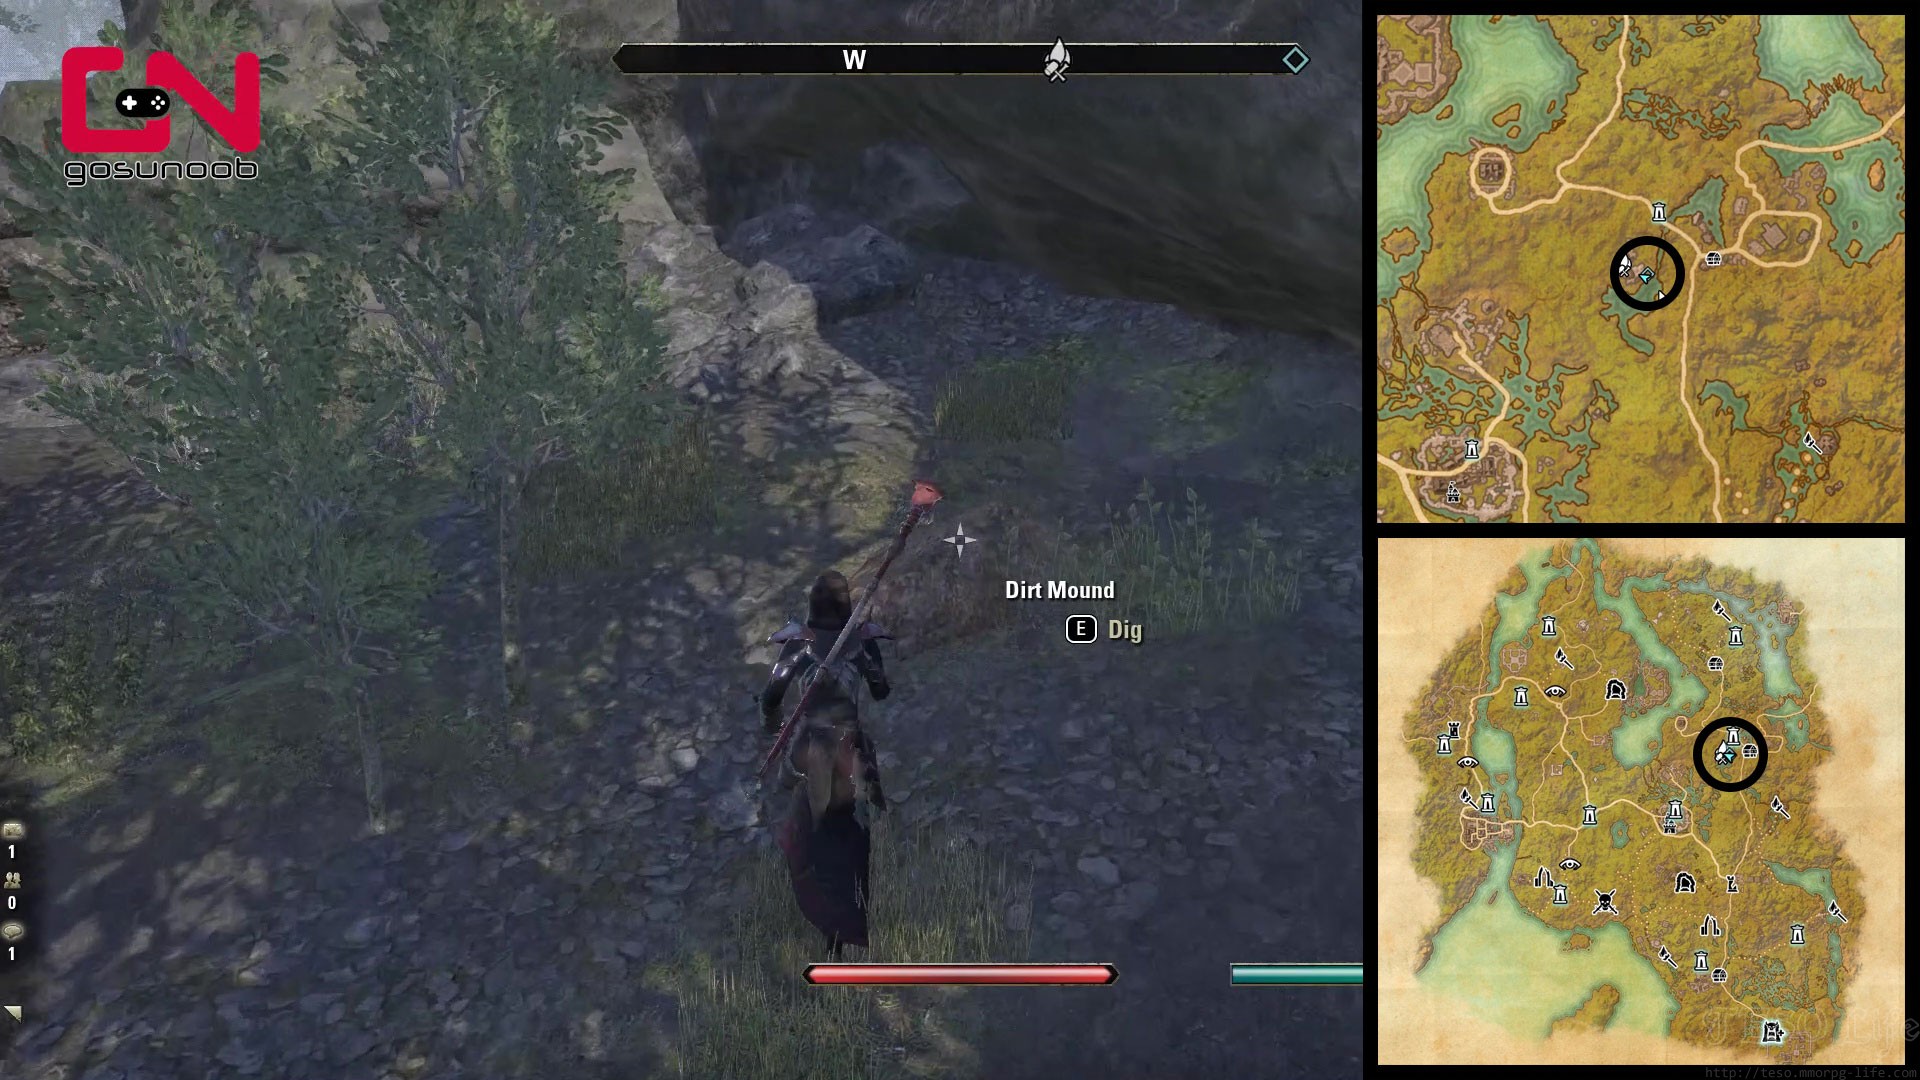 ESO BLackwood CE Treasure Map II Between a large tree and some Ruins